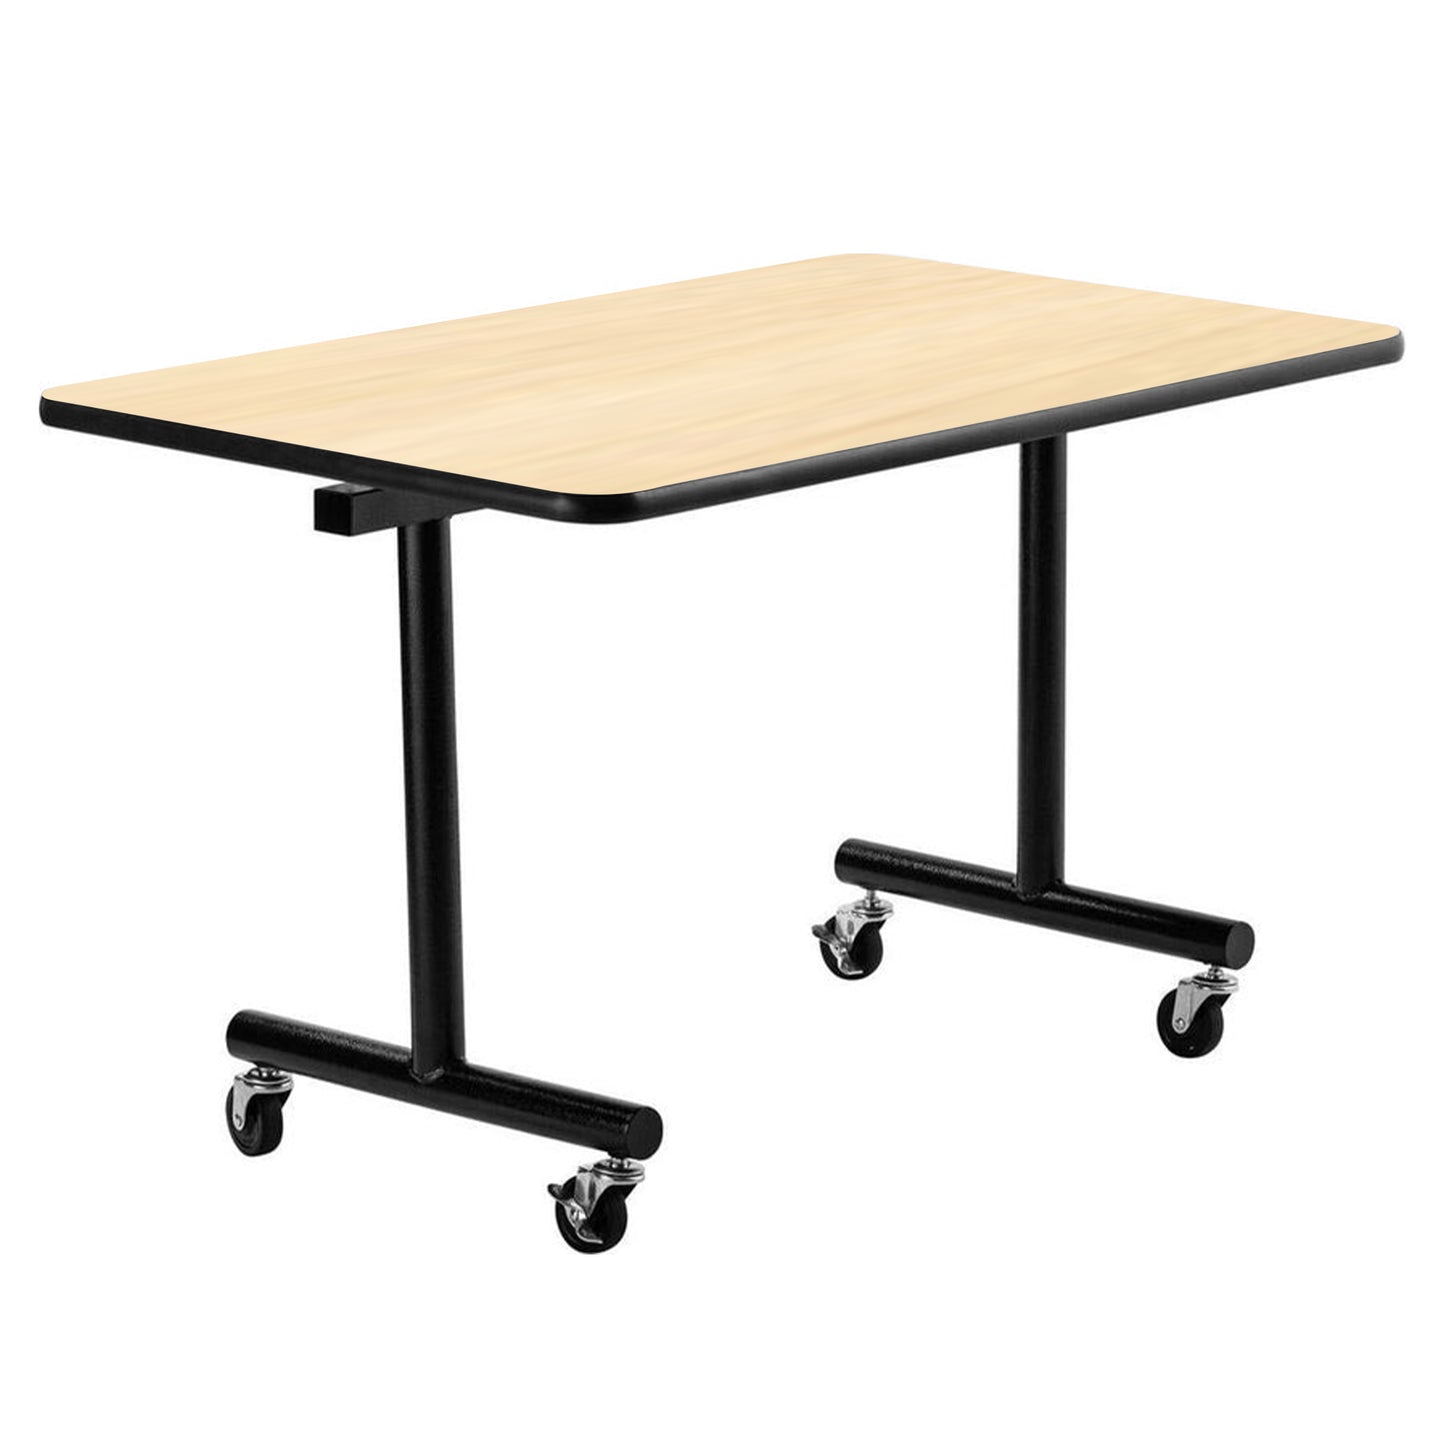 NPS ToGo Table, 30"x60", MDF Core (National Public Seating NPS-TGT3060MDPE)